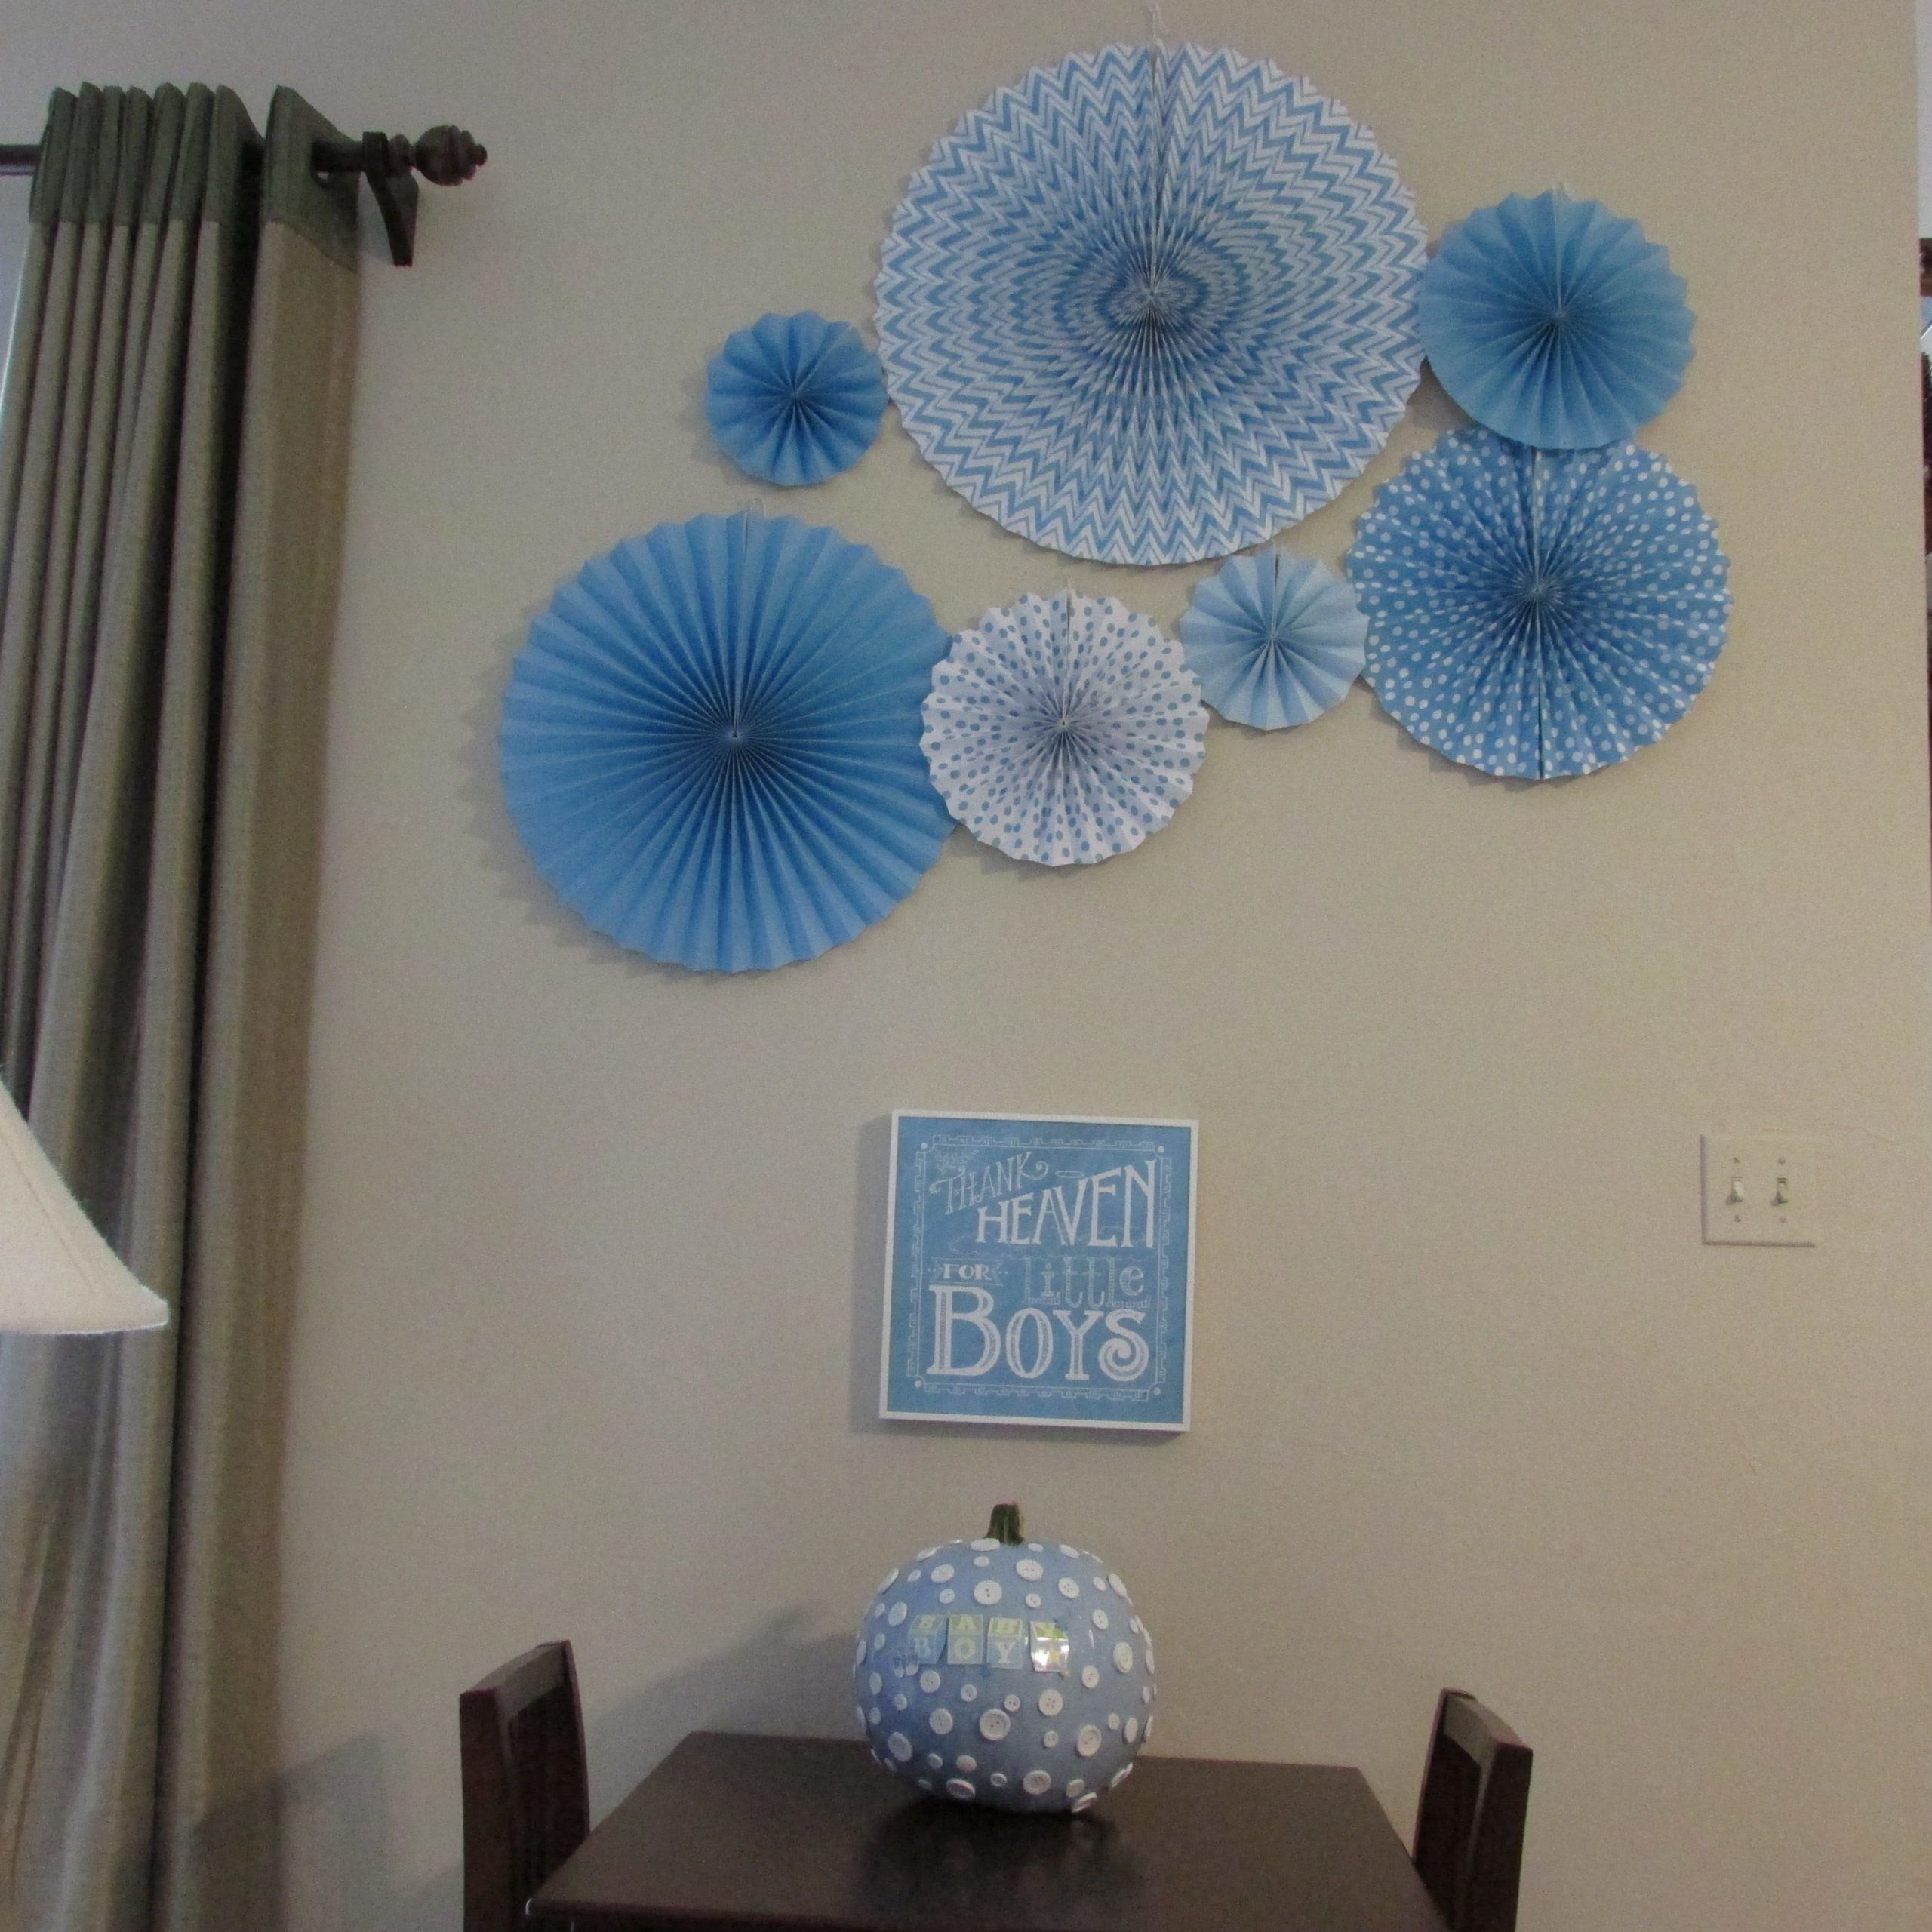 Blue Pinwheel Wall Decorations | Decor, Wall Decor, Home Decor Decals With Most Popular Pinwheel Wall Art (View 4 of 20)